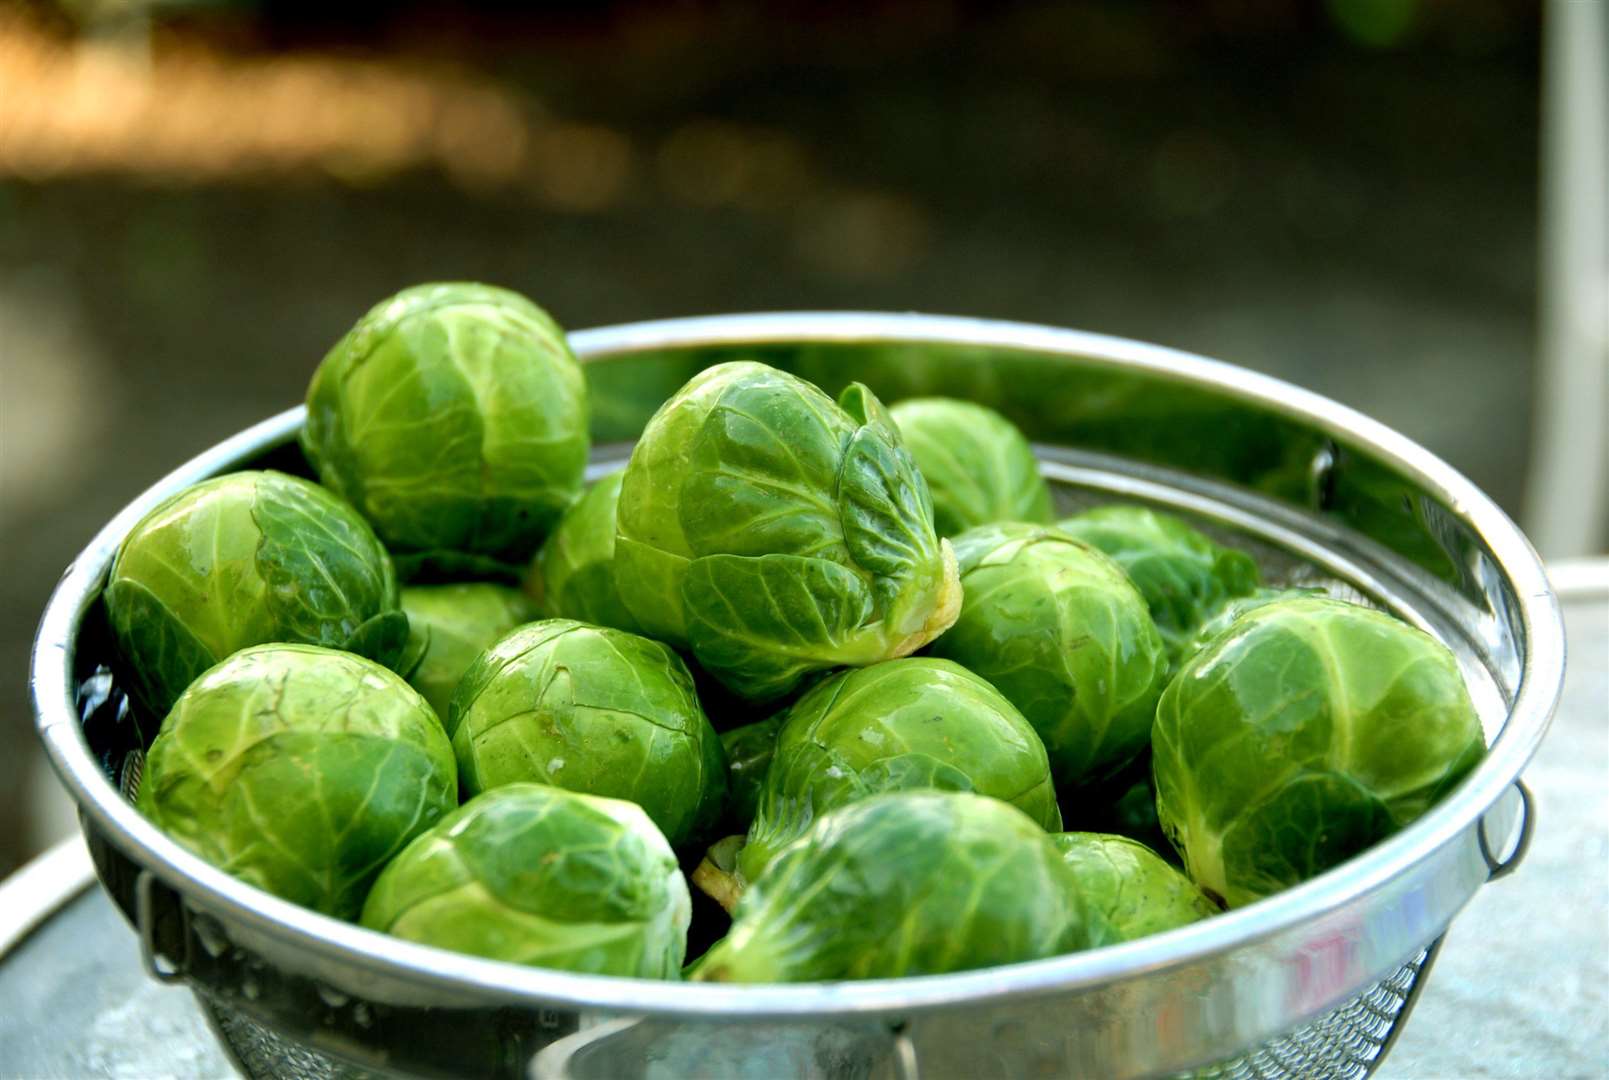 Brussels sprouts. Picture: funwithfood/istock